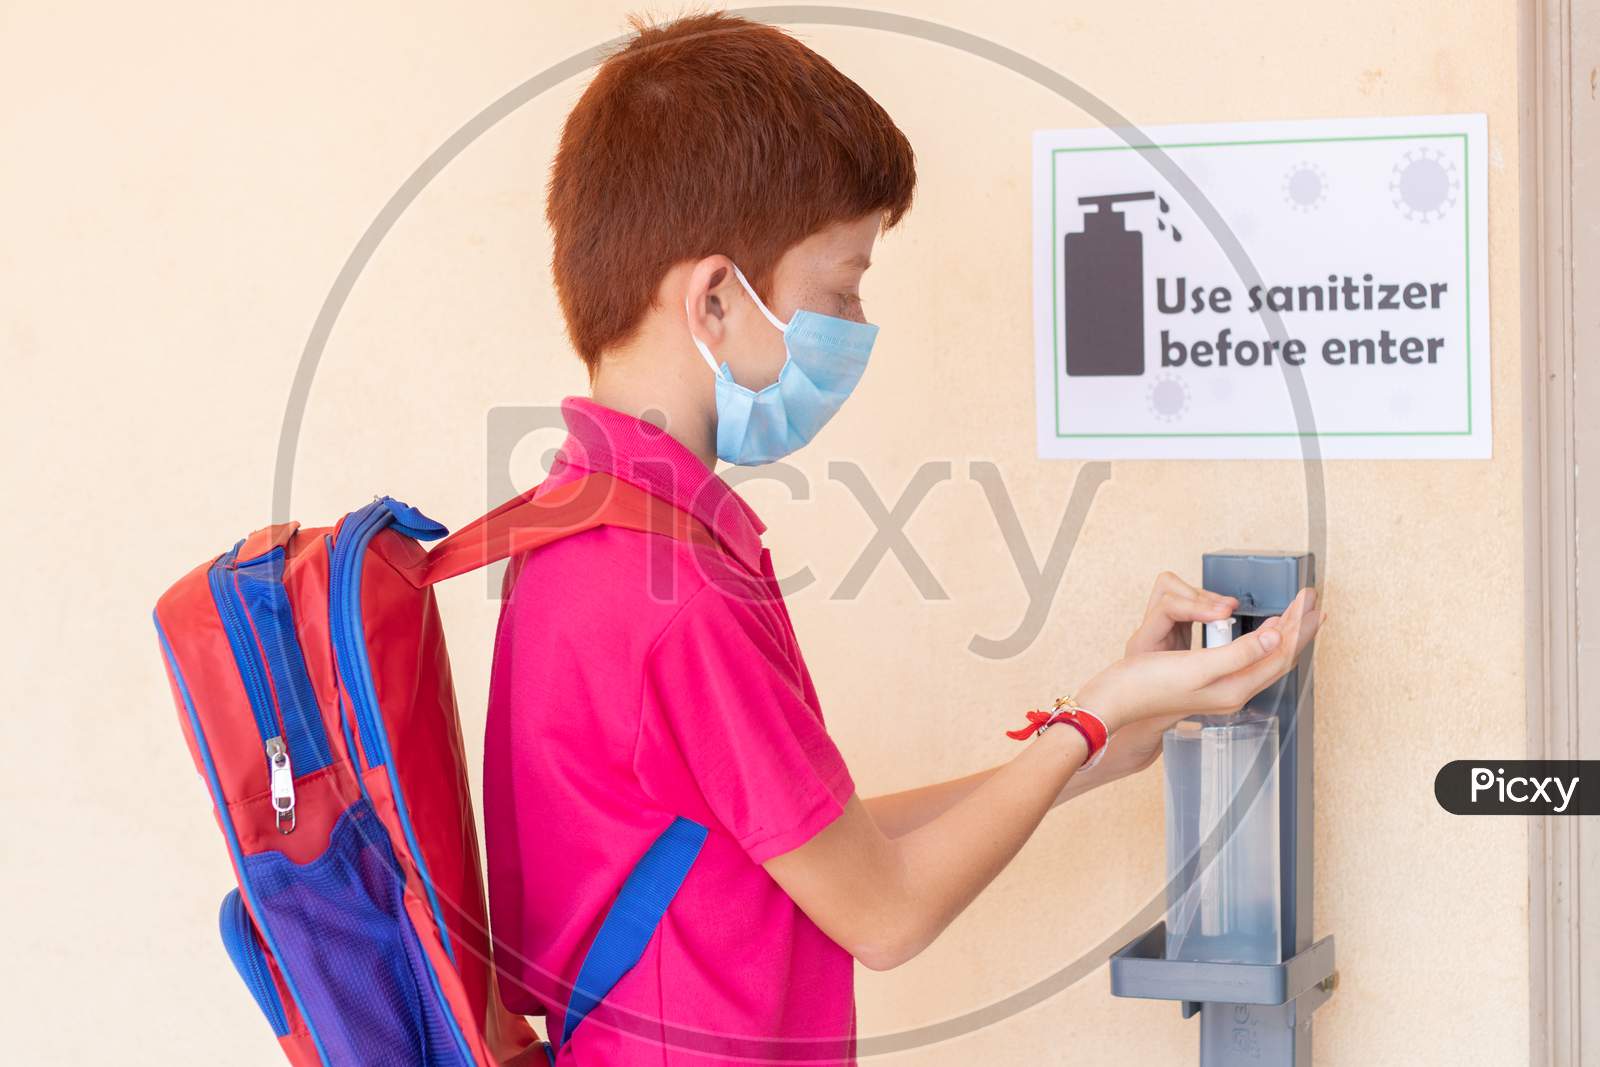 Kid With Medical Mask Using Hand Sanitizer Before Entering Classroom - Concept Of Back To School Or School Reopen And Coronavirus Or Covid-19 Safety Measures.